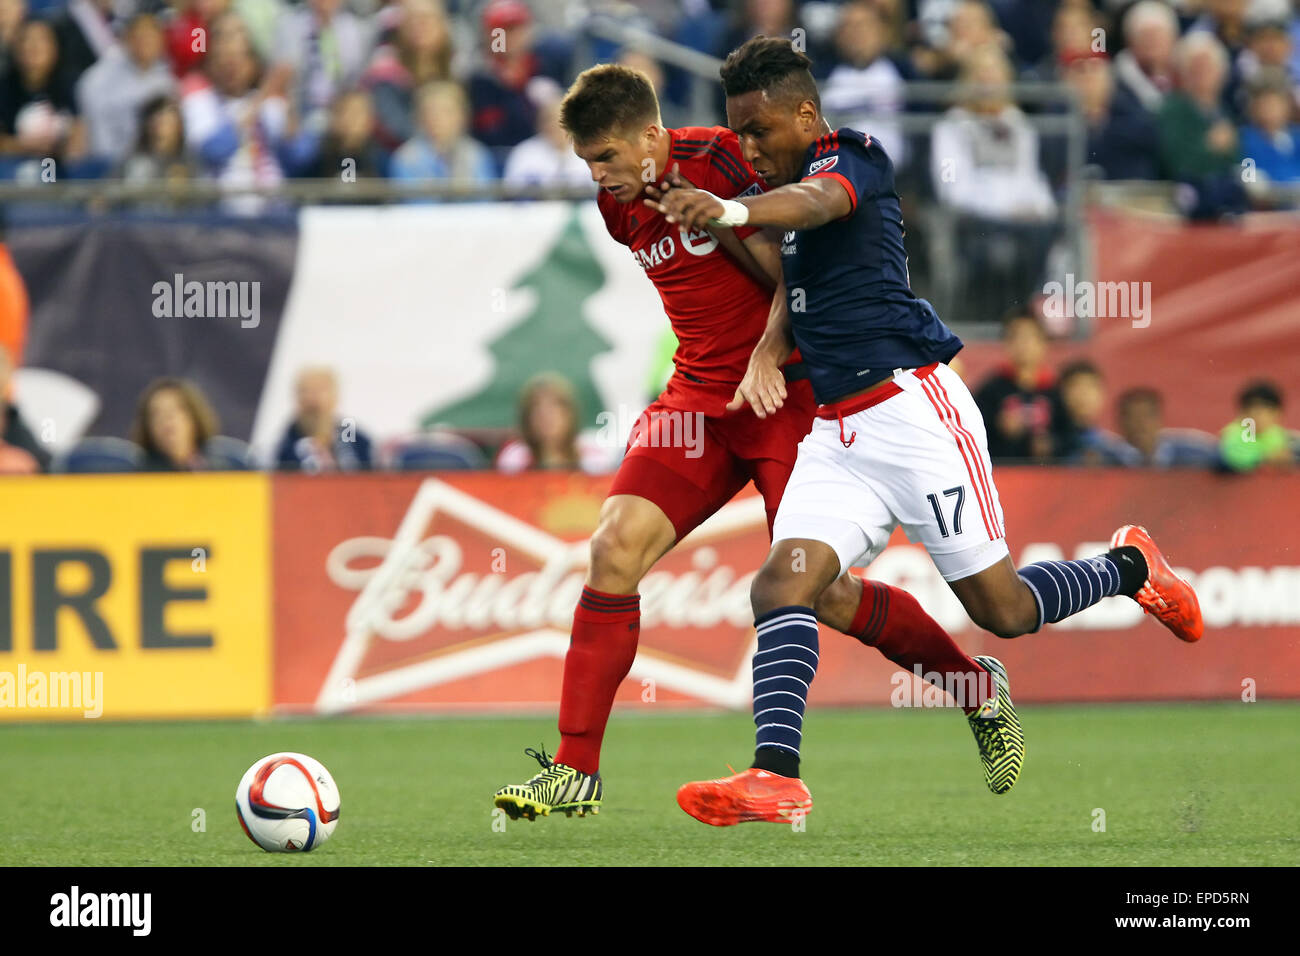 Foxborough, Massachusetts, USA. 16th May, 2015. Toronto FC defender Nick Hagglund (6) and New England Revolution forward Juan Agudelo (17) battle for the ball dyring the first half of an MLS game between the New England Revolution and Toronto FC at Gillette Stadium. New England and Toronto played to a 1-1 tie. Credit:  Cal Sport Media/Alamy Live News Stock Photo